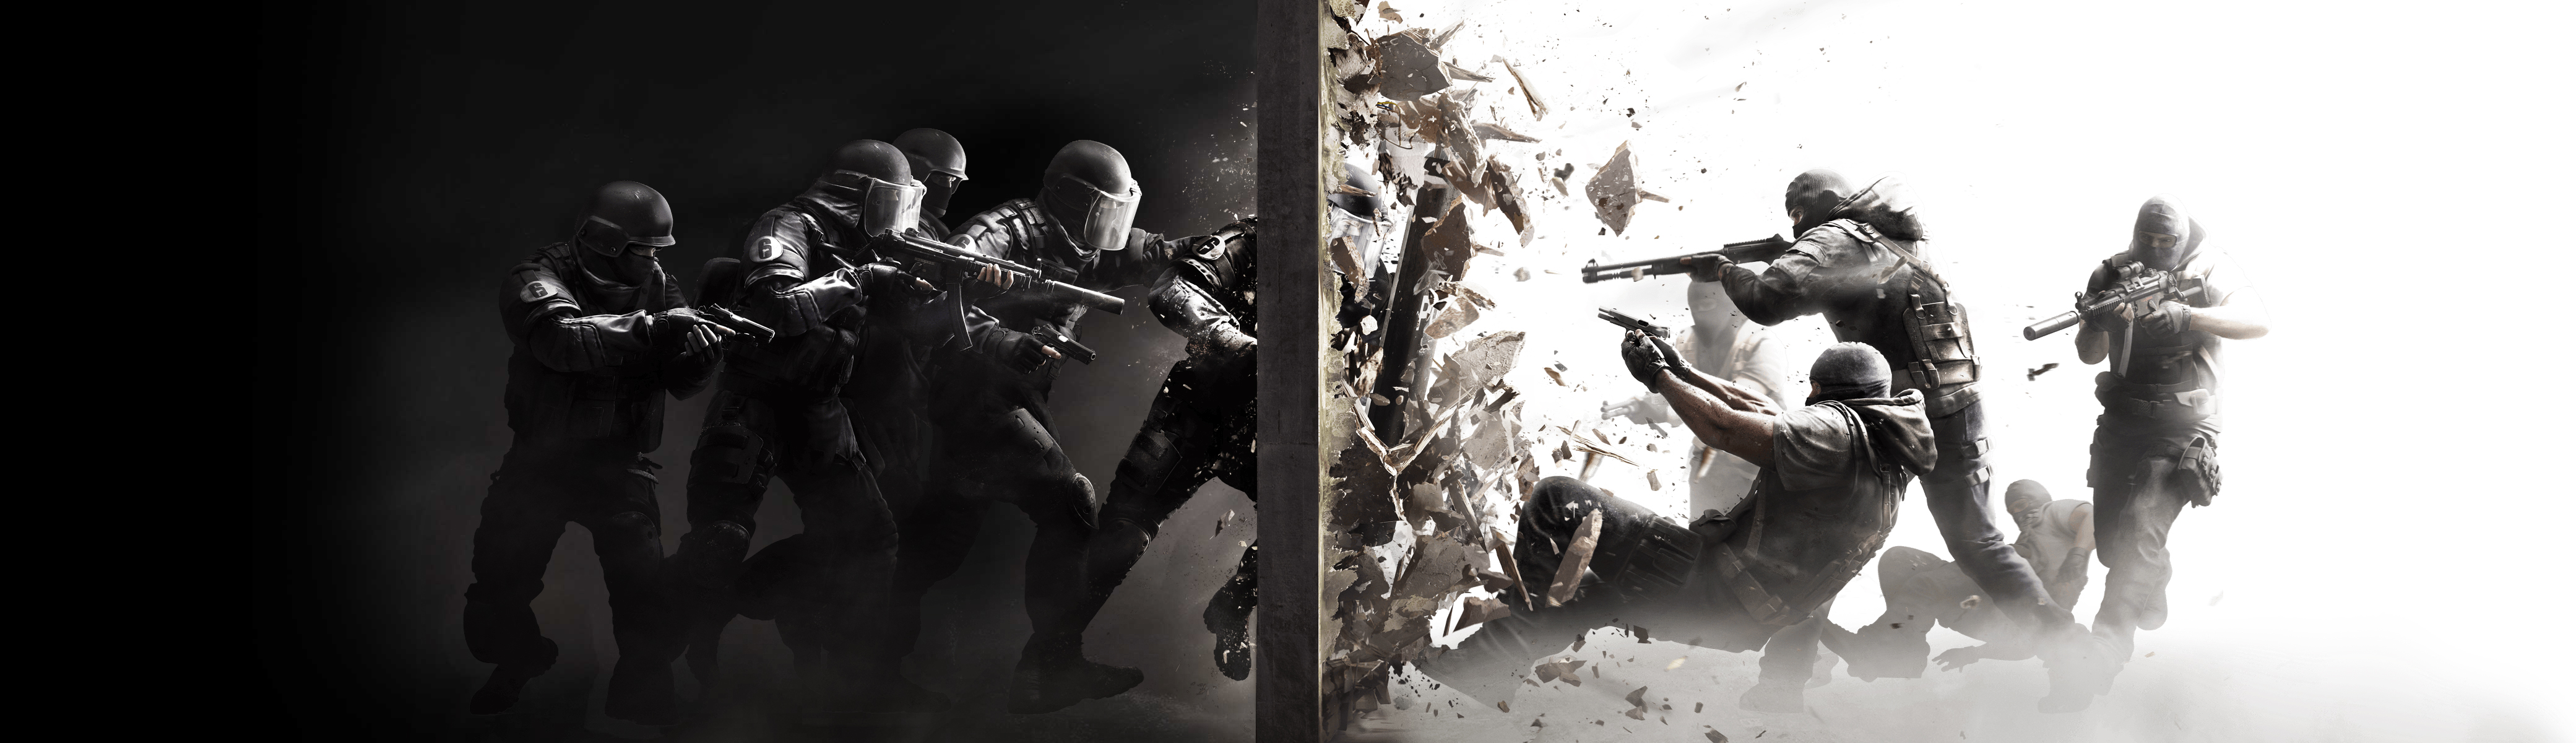 570+ Tom Clancy's Rainbow Six: Siege HD Wallpapers and Backgrounds